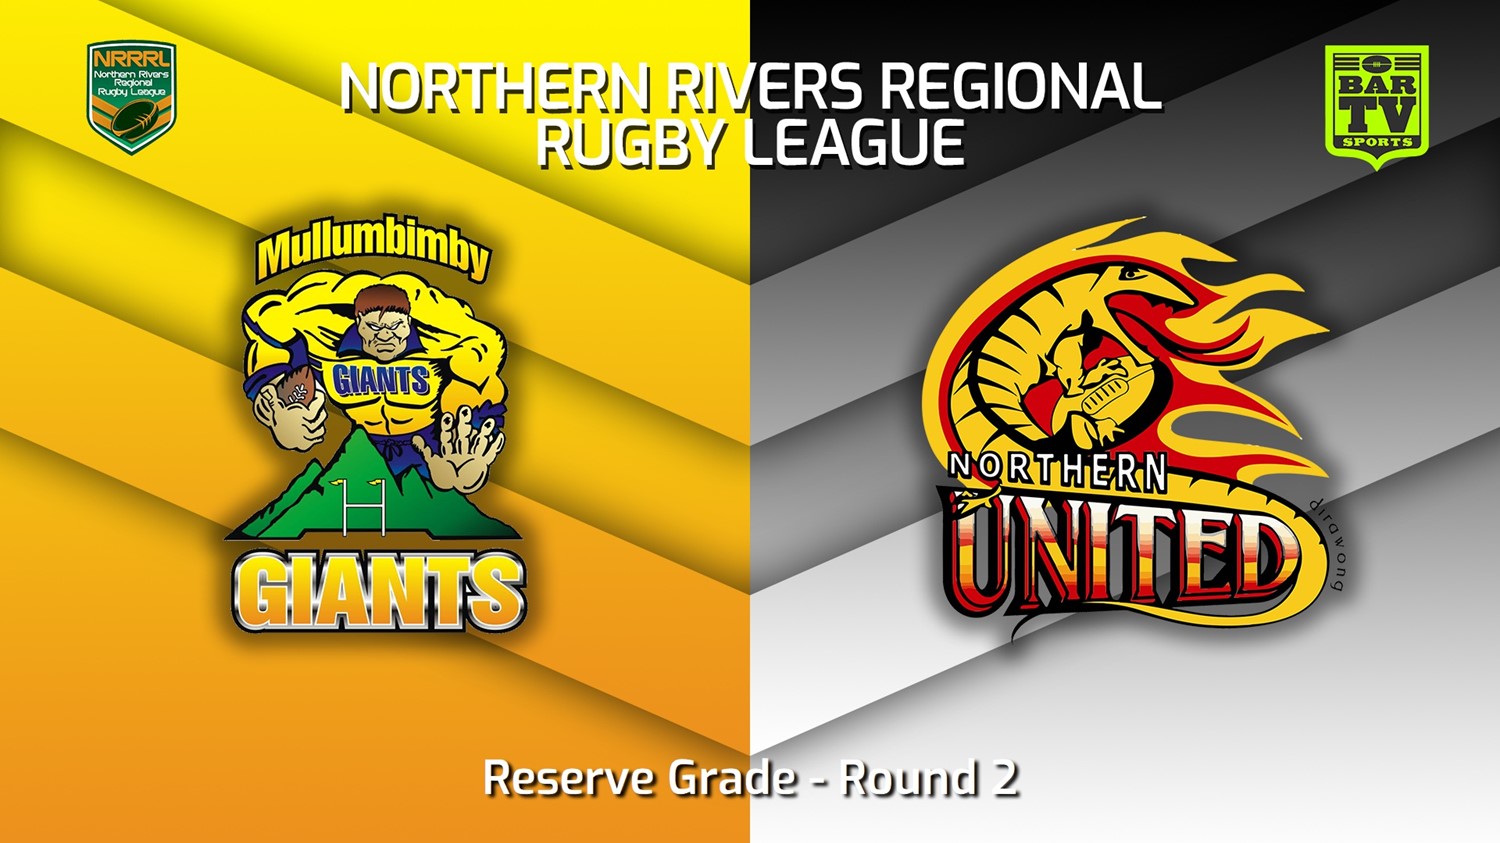 230423-Northern Rivers Round 2 - Reserve Grade - Mullumbimby Giants v Northern United Slate Image